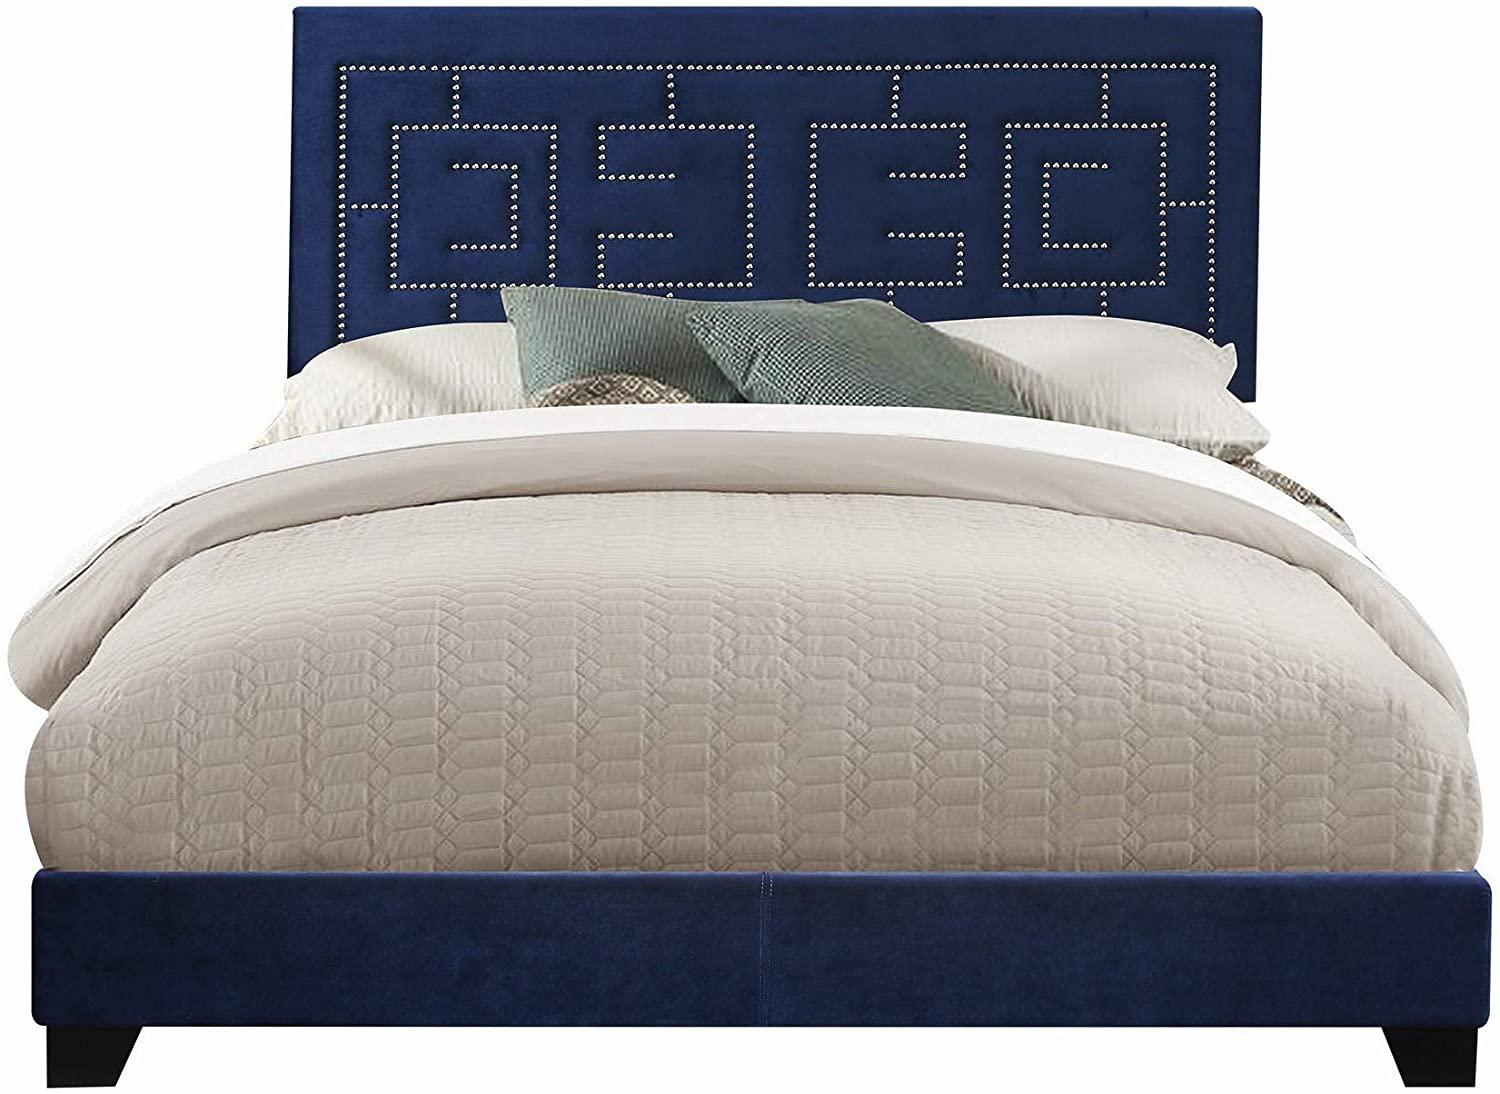 Transitional Queen Bed Ishiko III 21640Q in Blue Fabric